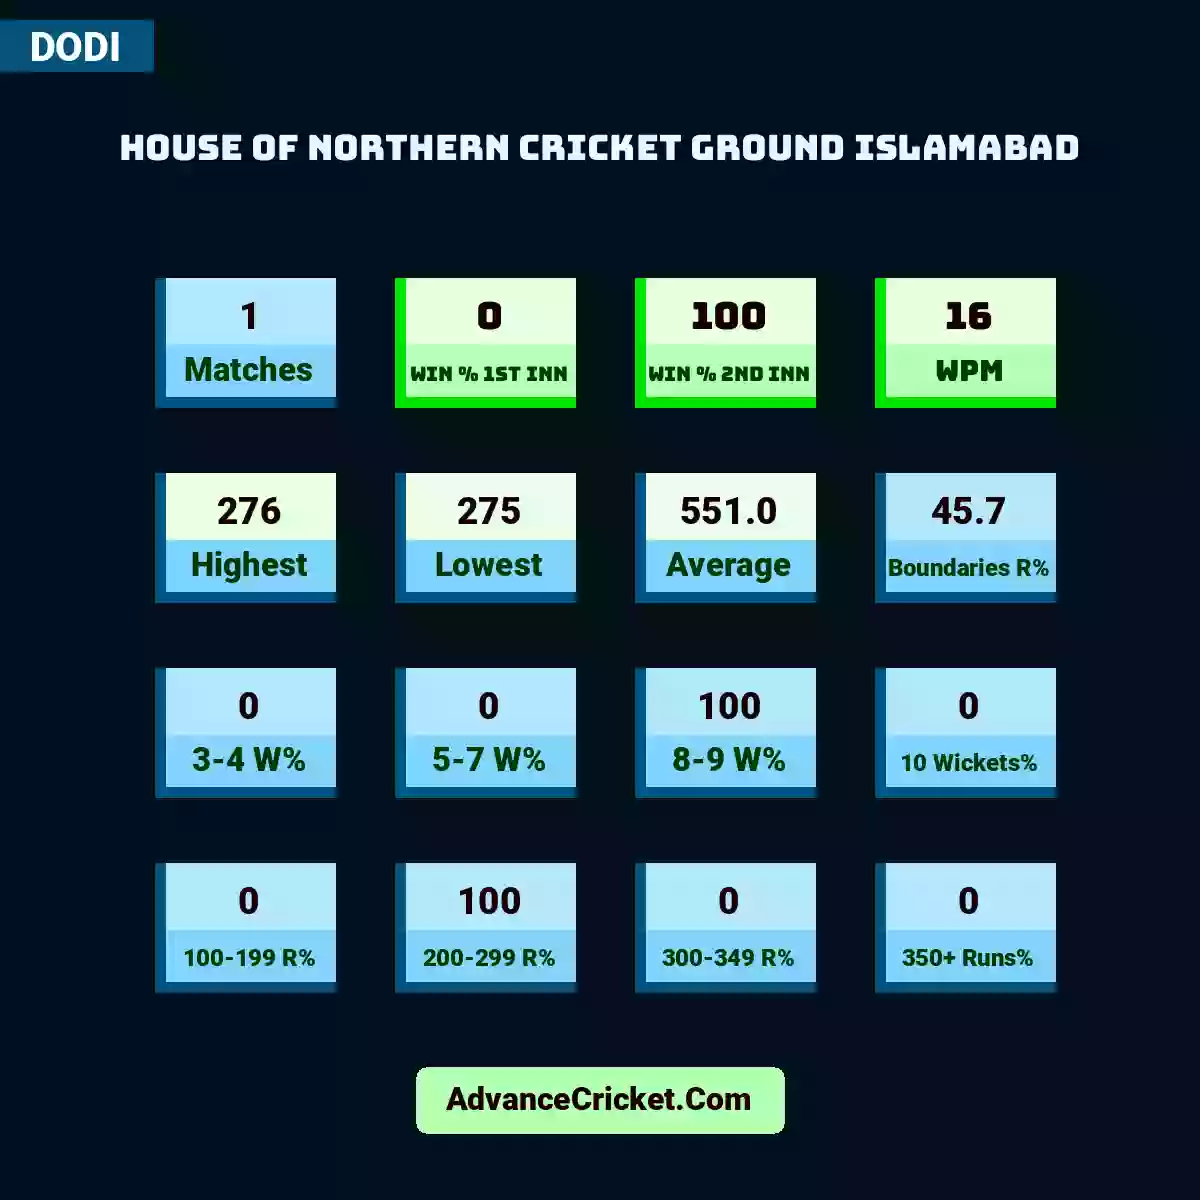 Image showing House of Northern Cricket Ground Islamabad with Matches: 1, Win % 1st Inn: 0, Win % 2nd Inn: 100, WPM: 16, Highest: 276, Lowest: 275, Average: 551.0, Boundaries R%: 45.7, 3-4 W%: 0, 5-7 W%: 0, 8-9 W%: 100, 10 Wickets%: 0, 100-199 R%: 0, 200-299 R%: 100, 300-349 R%: 0, 350+ Runs%: 0.